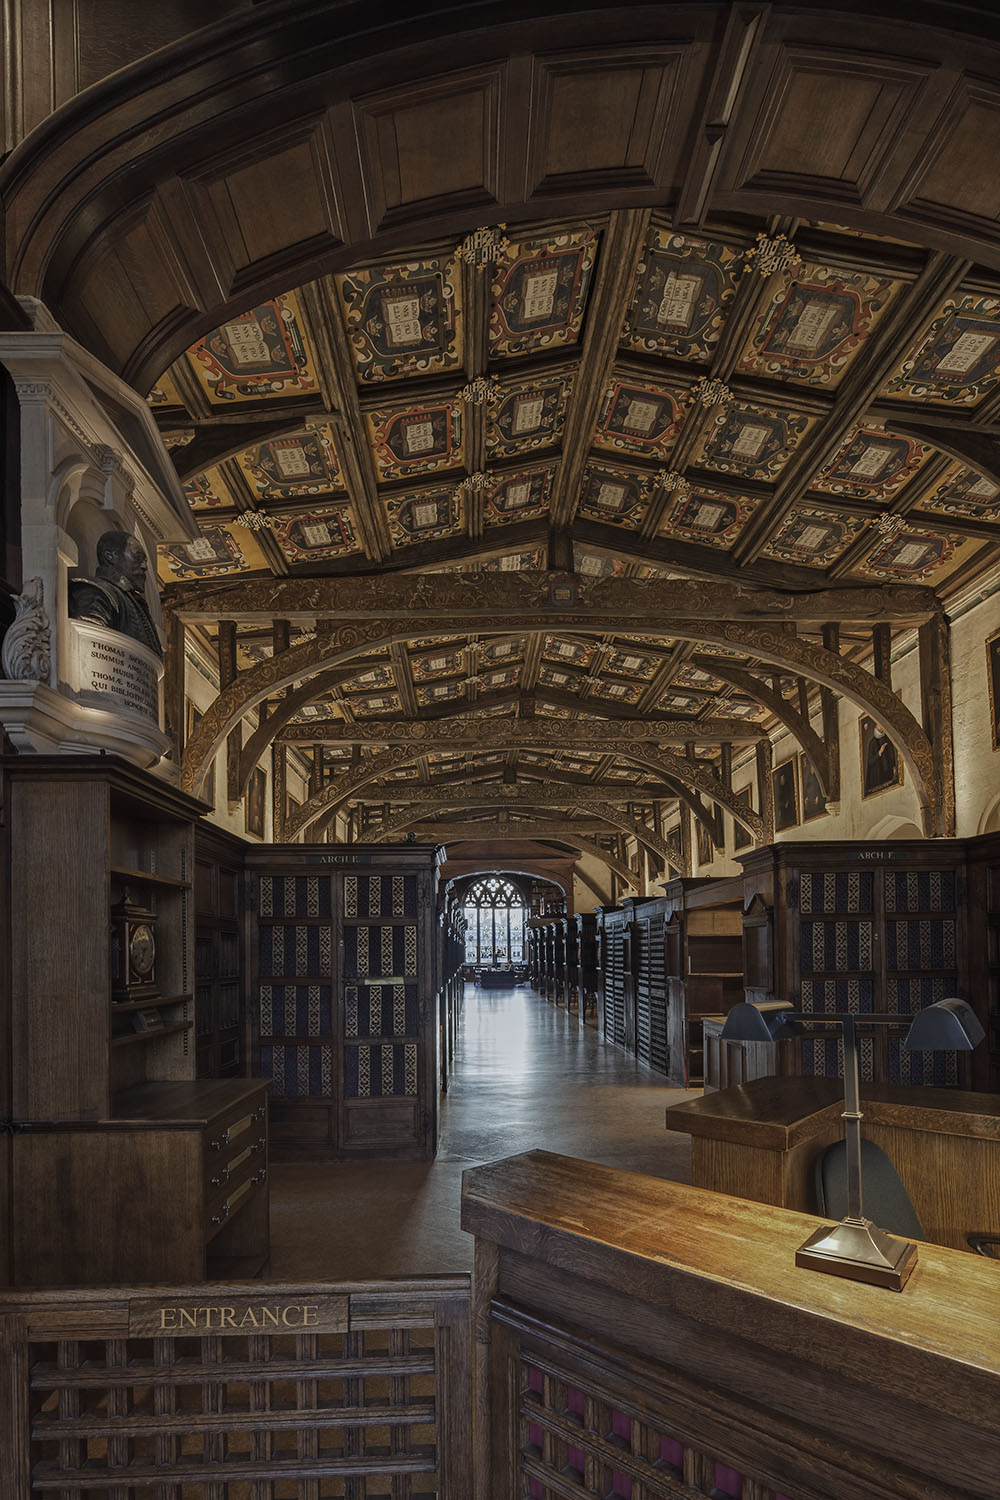  Photography by Dan Paton showcasing the new lighting installation by Urban Jungle and Oxford University Estates in Duke Humfrey's Library - the oldest part of the Bodleian Library, University of Oxford, Oxford, UK 